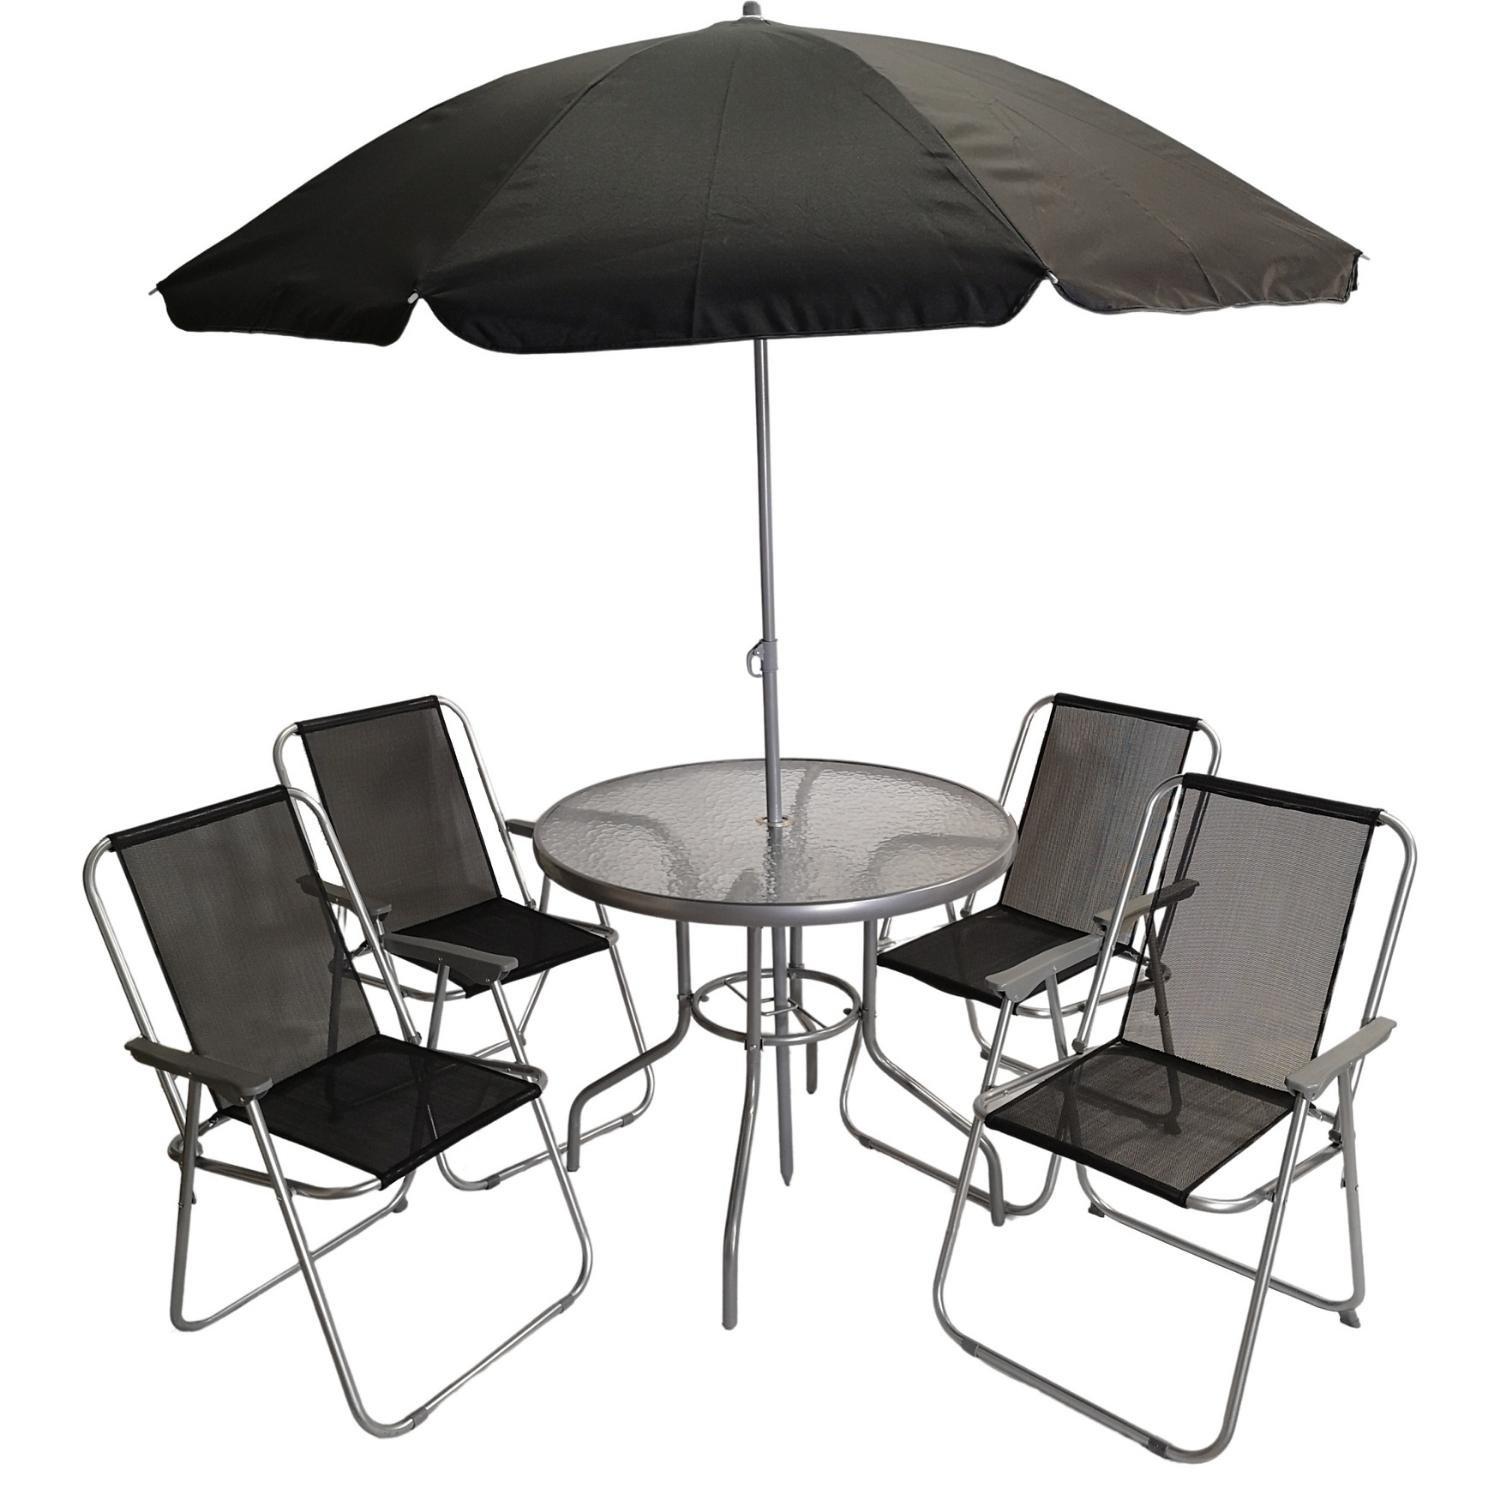 Samuel Alexander 4 Seater Garden Table And Chairs Set 4 Folding Chairs Outdoor Glass Table Garden Di